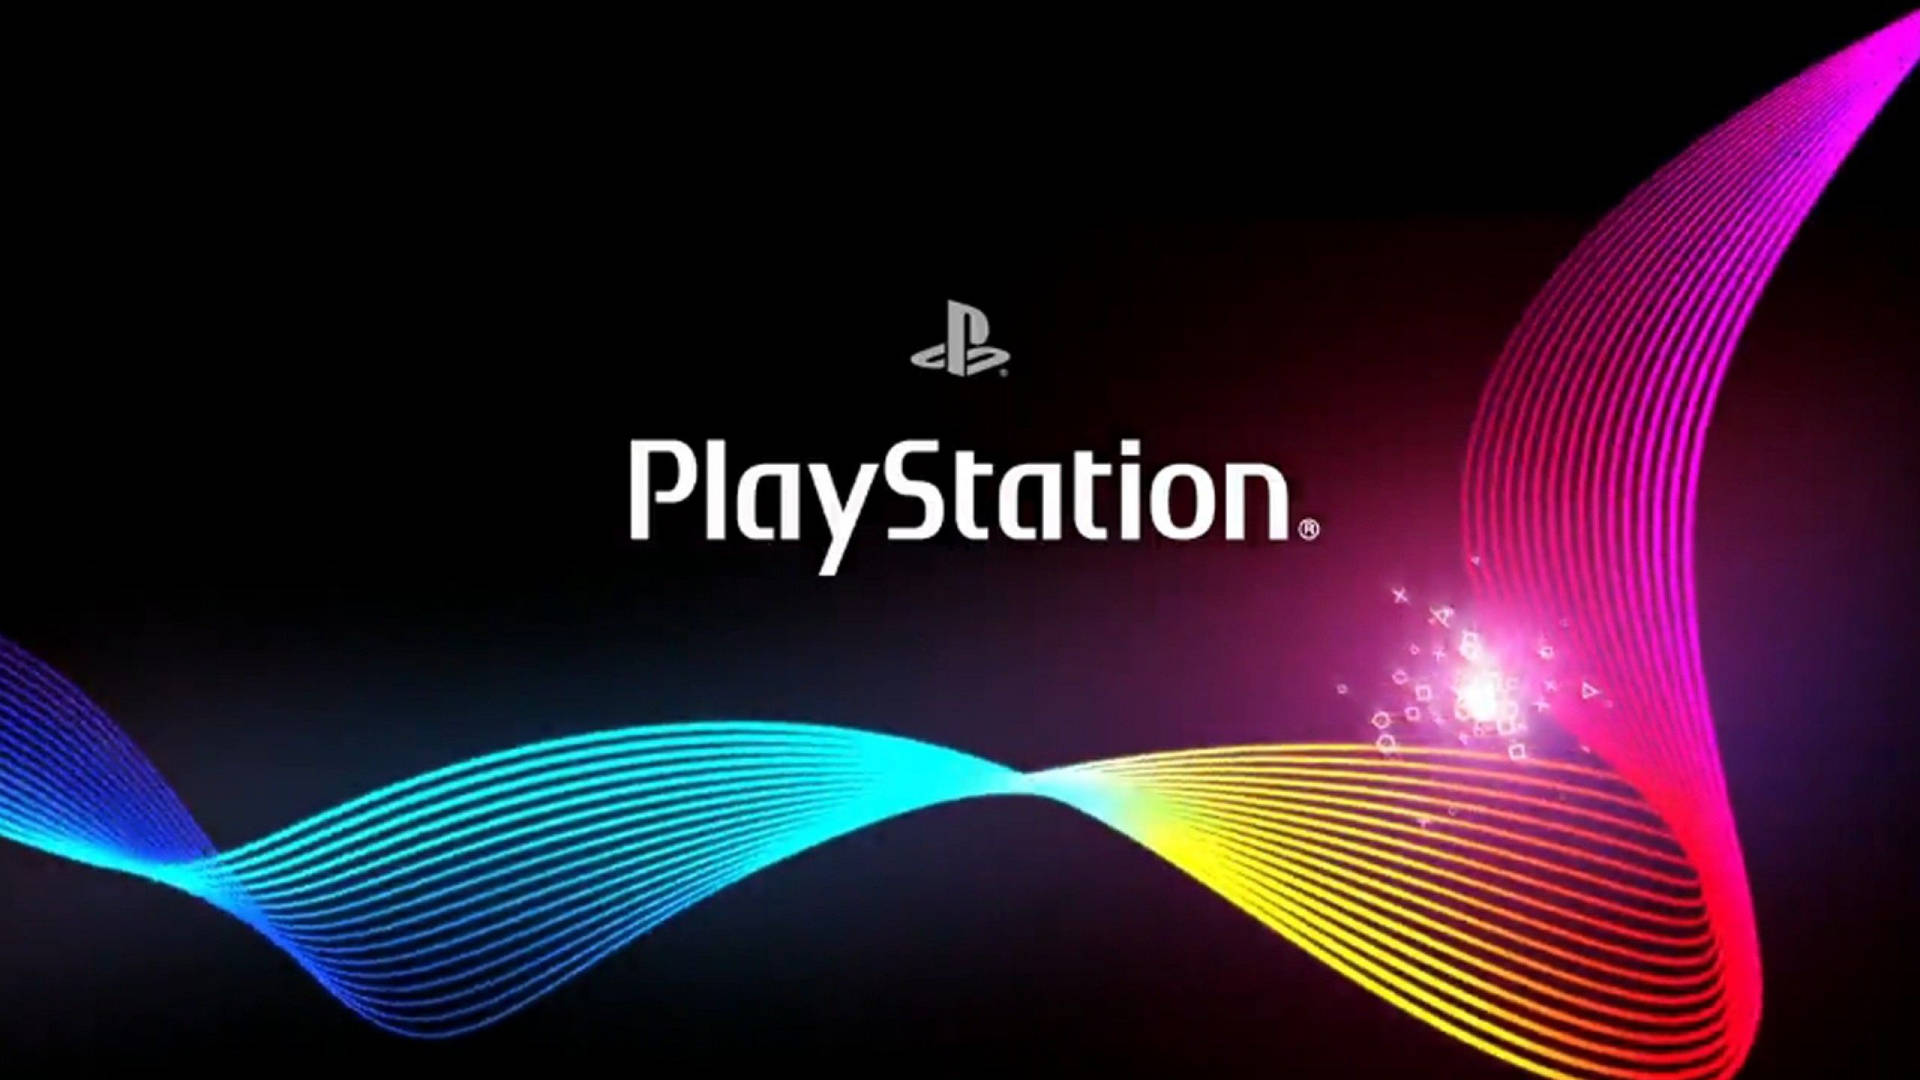 Playstation 2560X1440 Wallpaper and Background Image